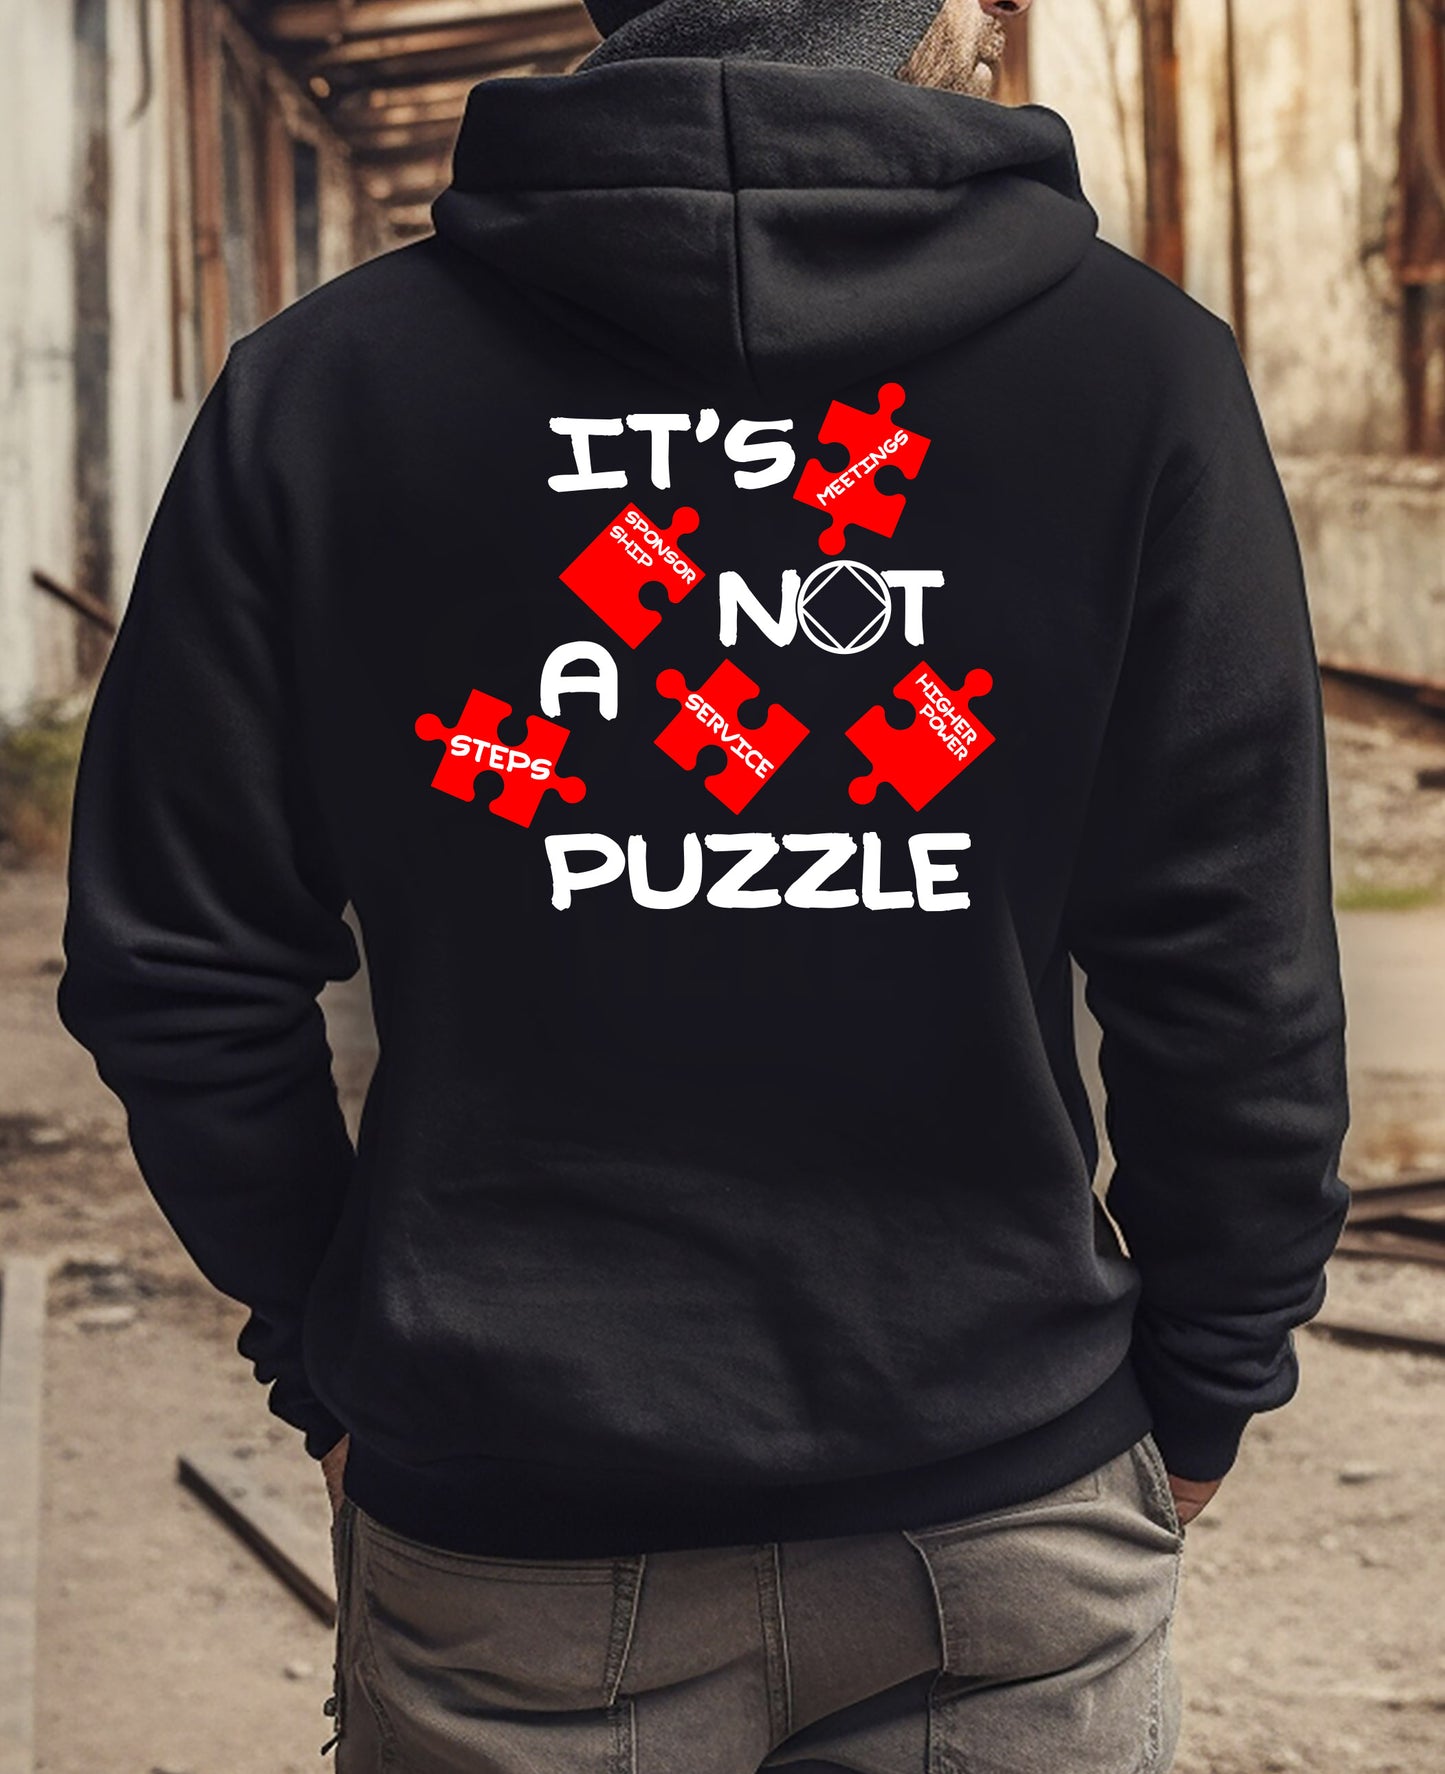 'It's Not a Puzzle' Work the 12 steps Unisex Hoodie Good Gifts for Newcomers